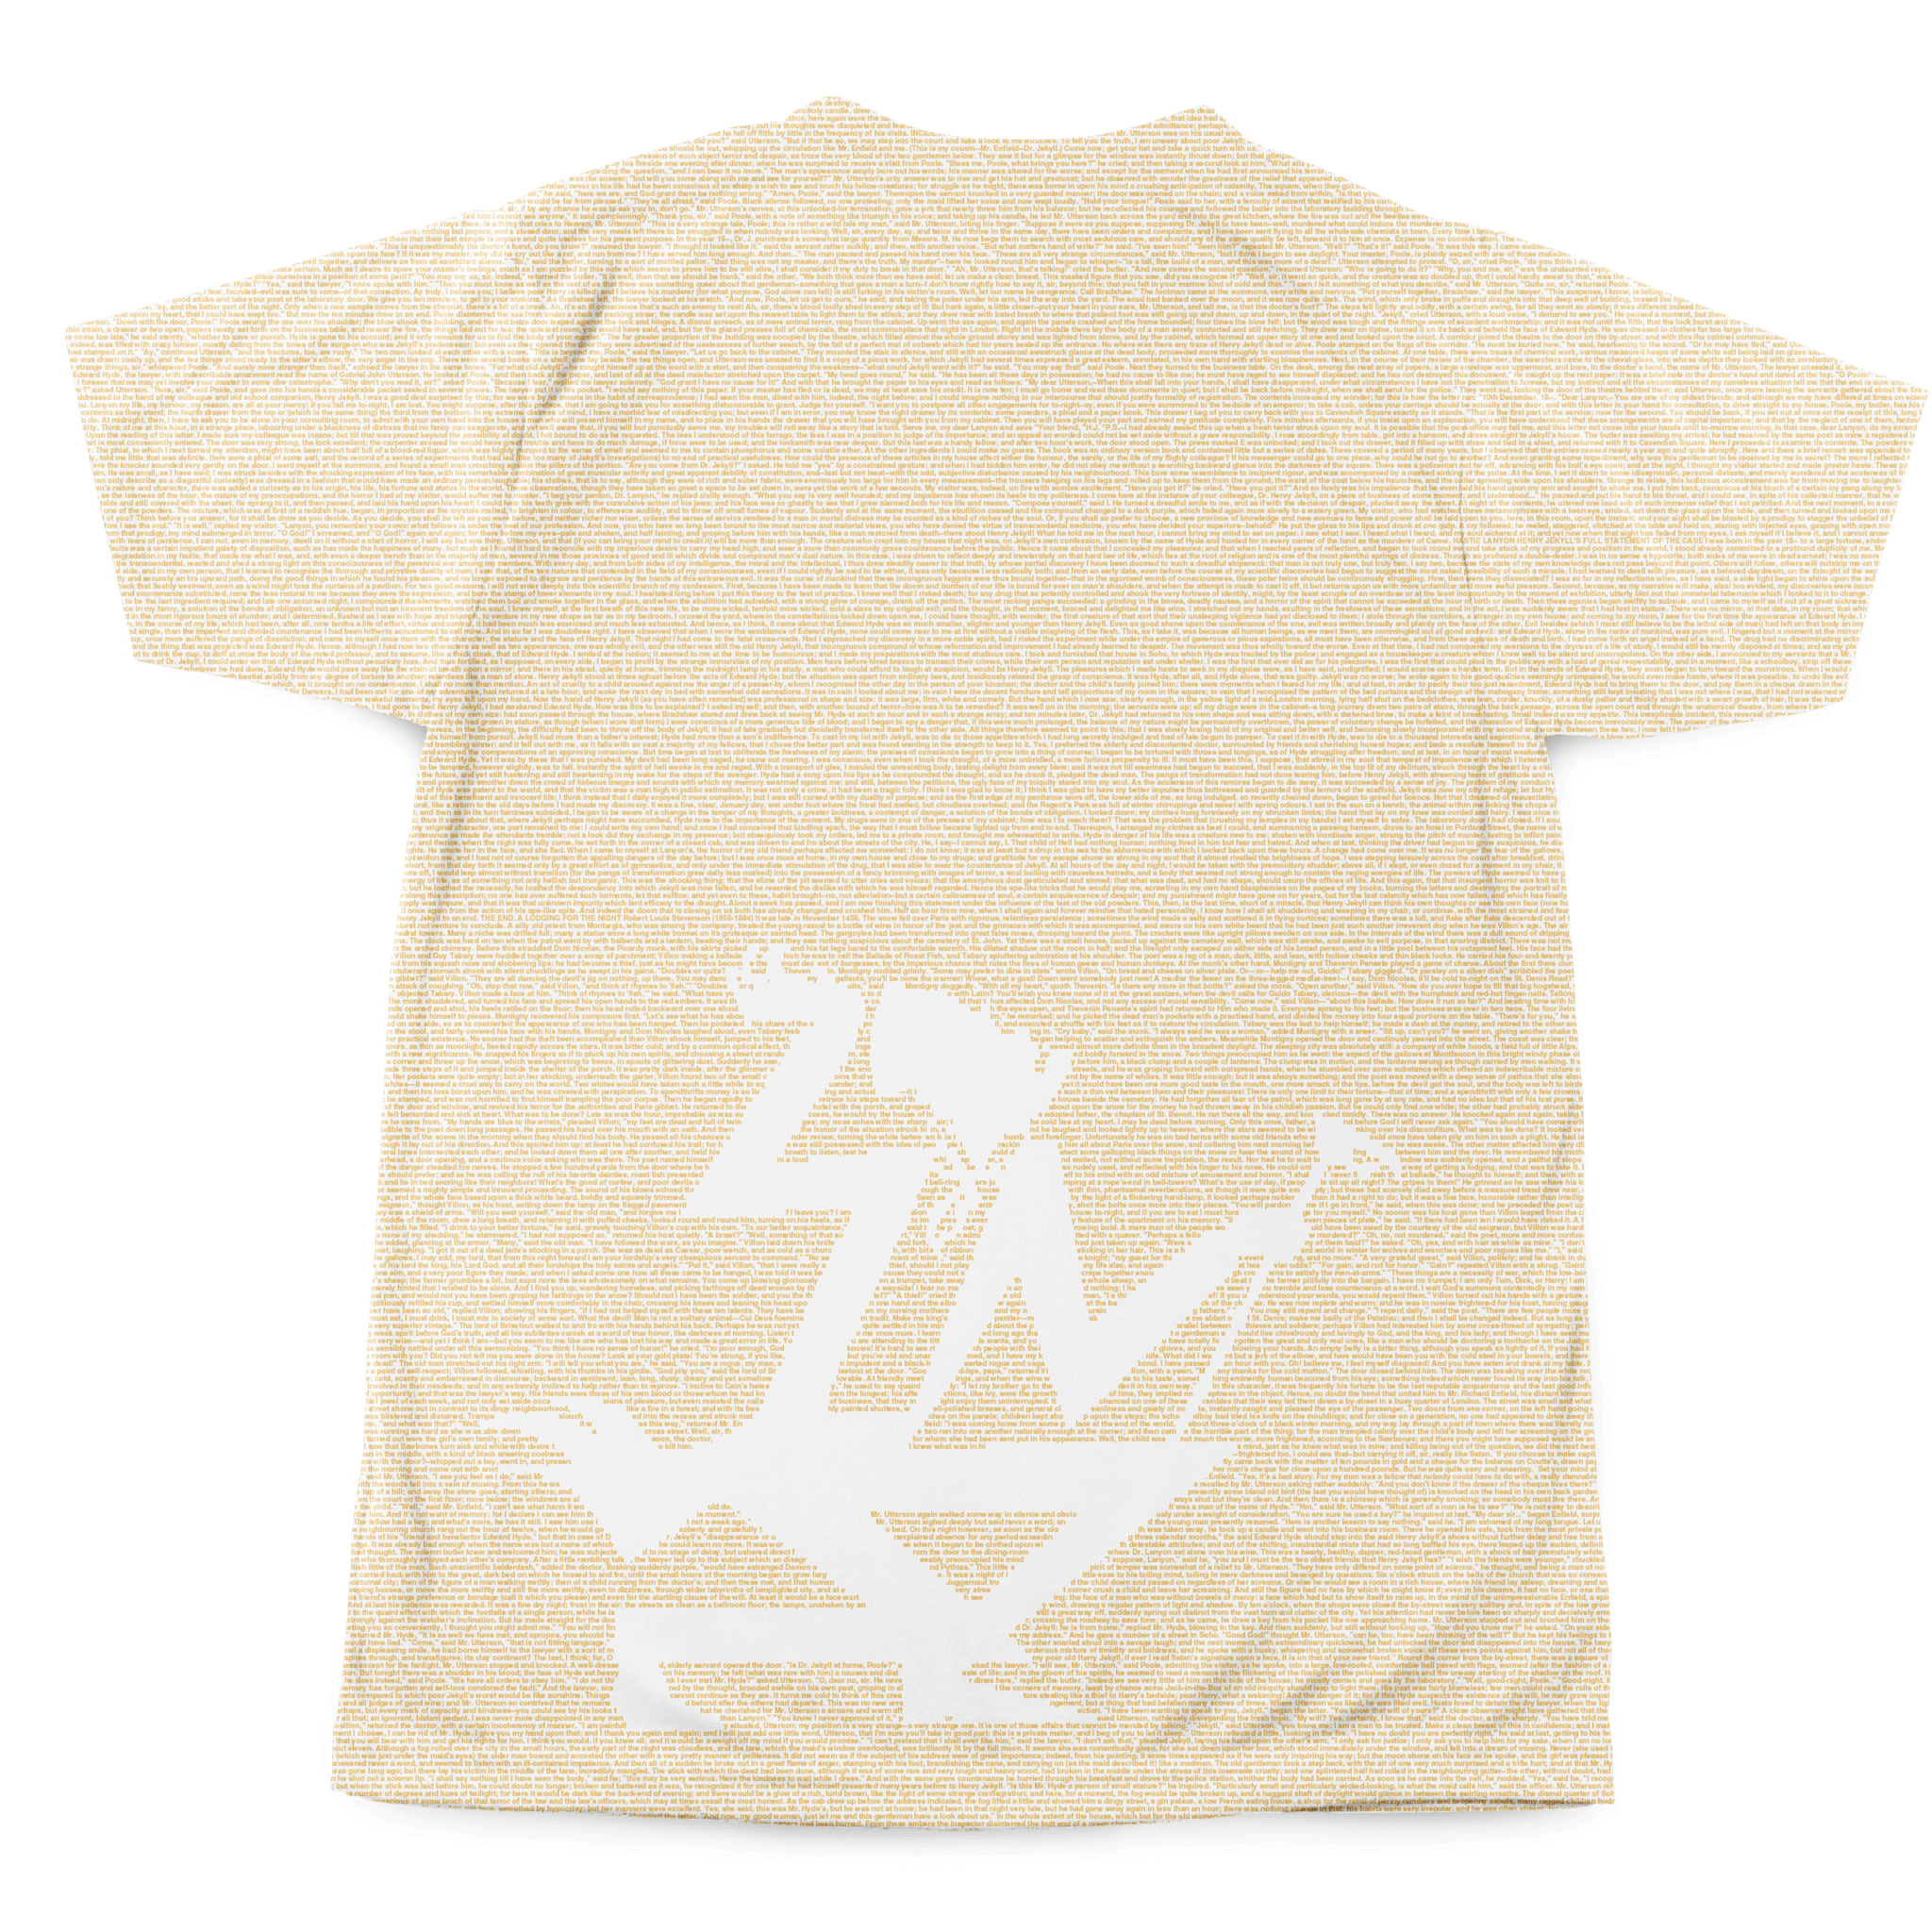 what do you think about this stussy-LV shirt? Unlike other